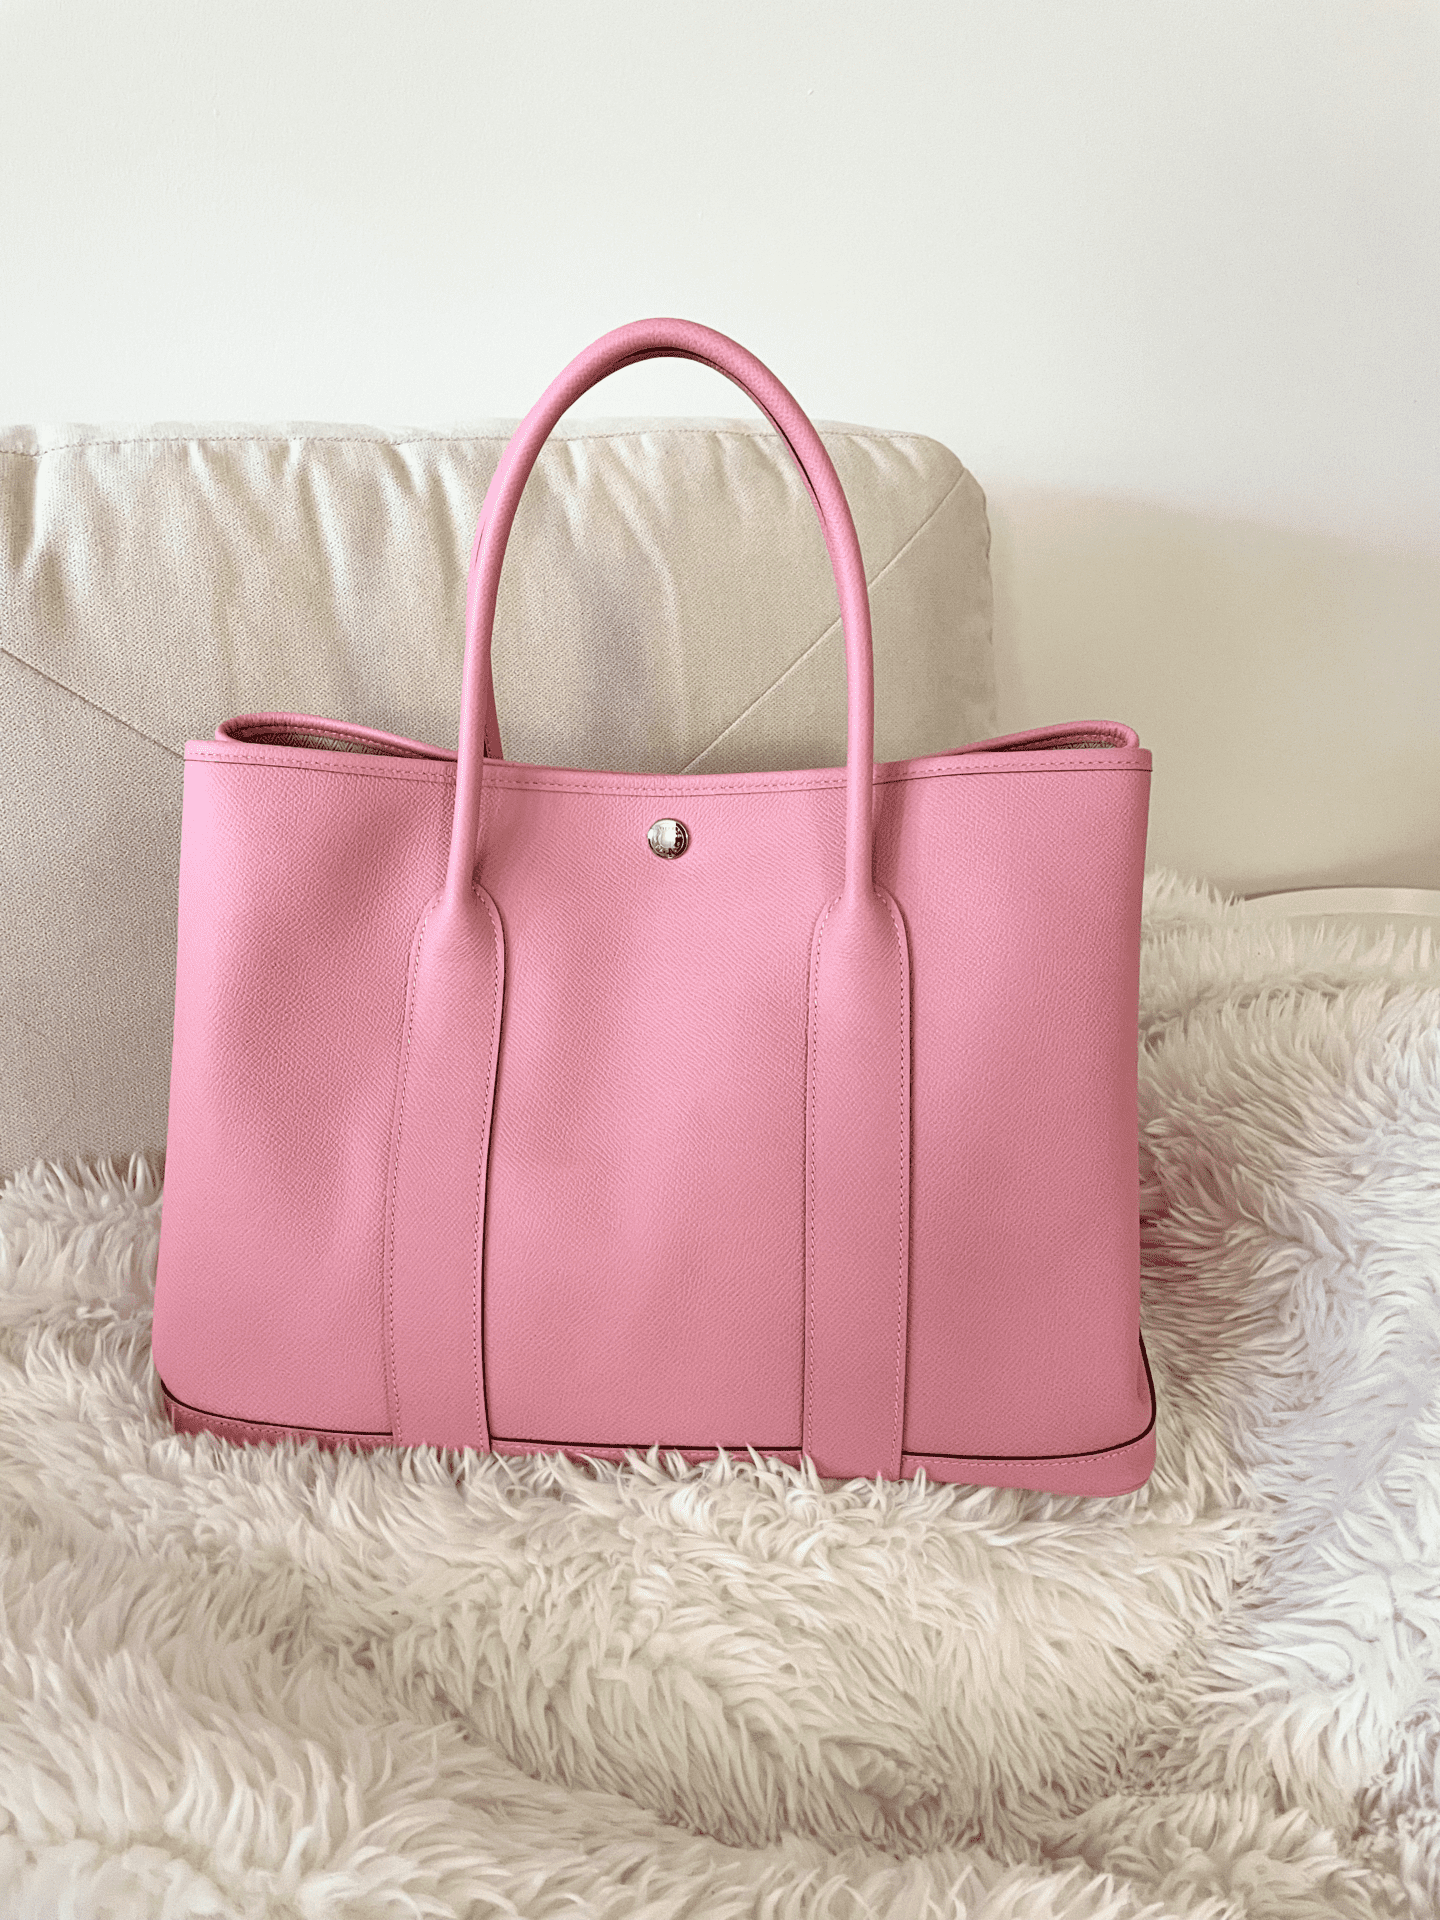 Hermes Garden Party 36 in pink leather